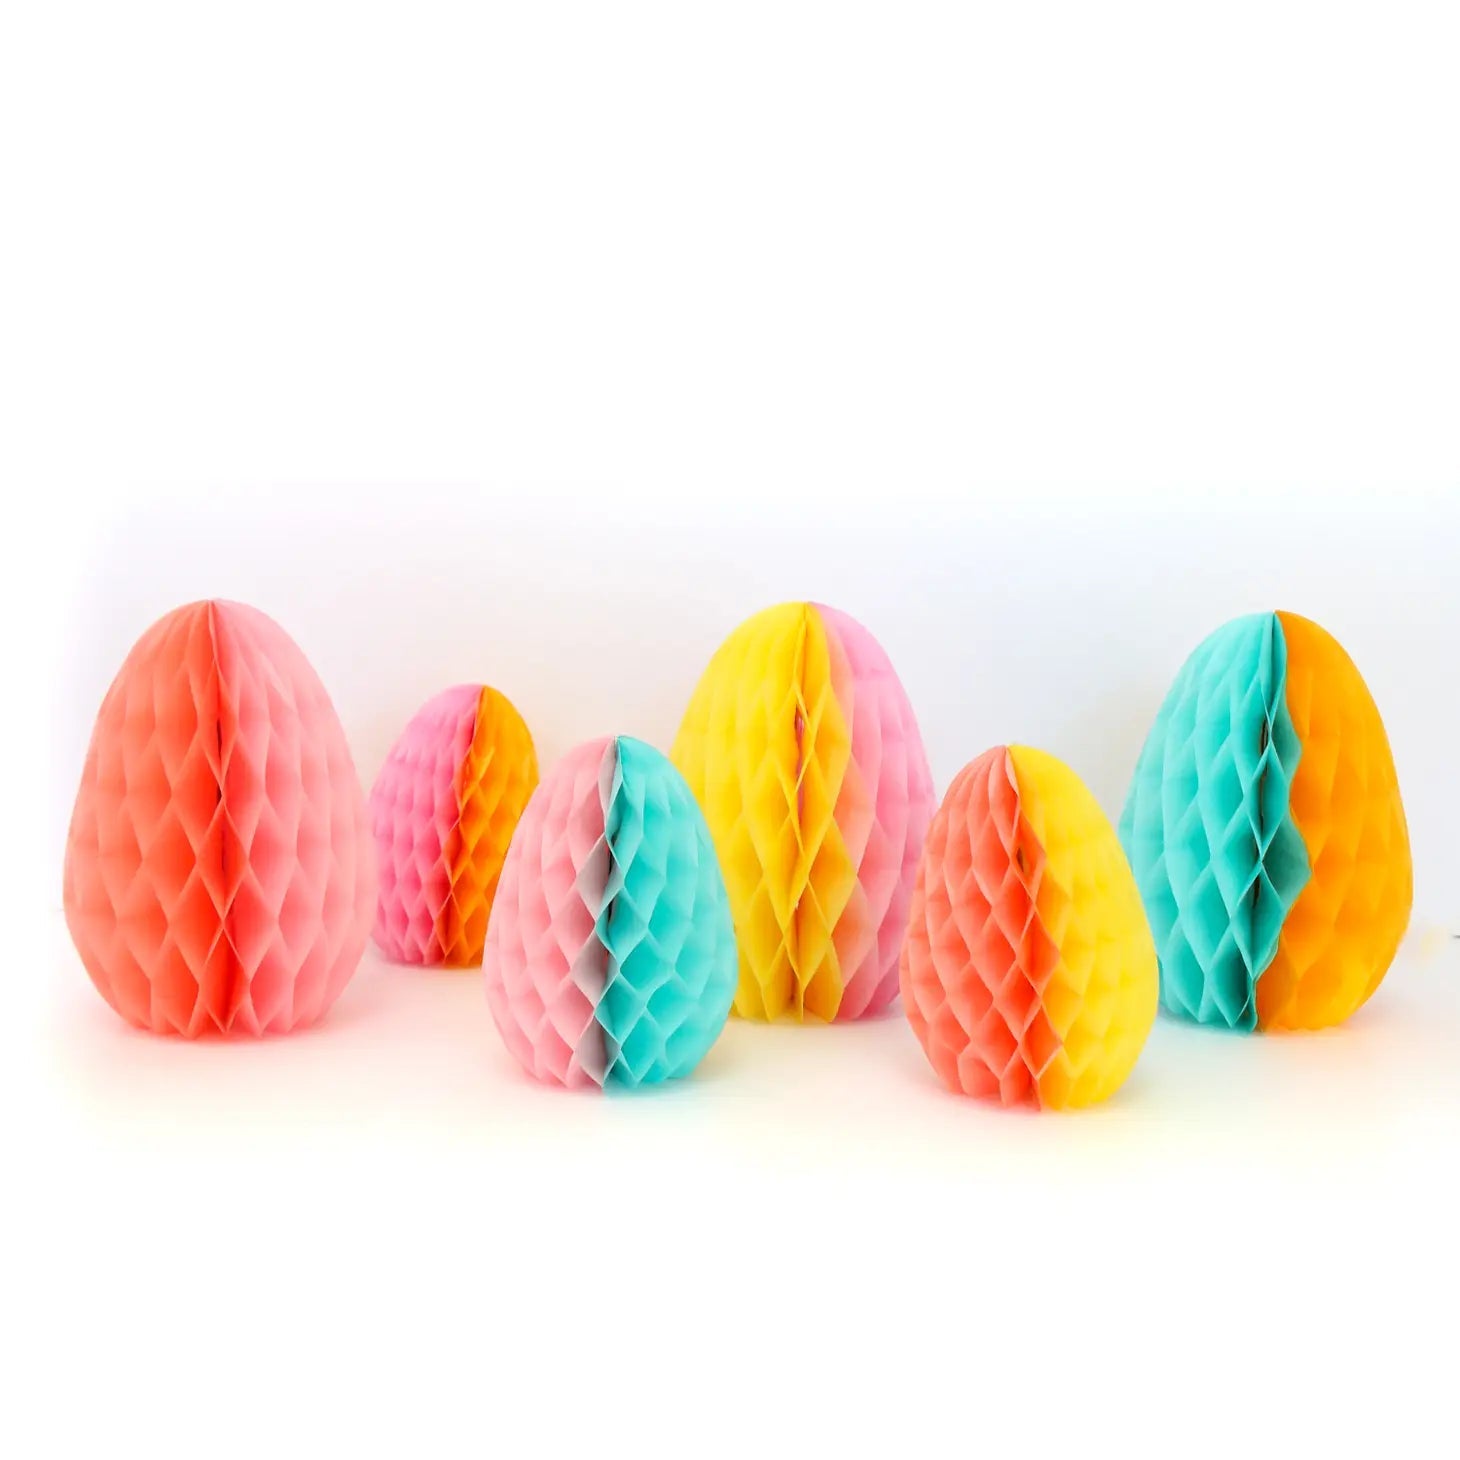 Honeycomb Colorblock Easter Eggs Kailo Chic 